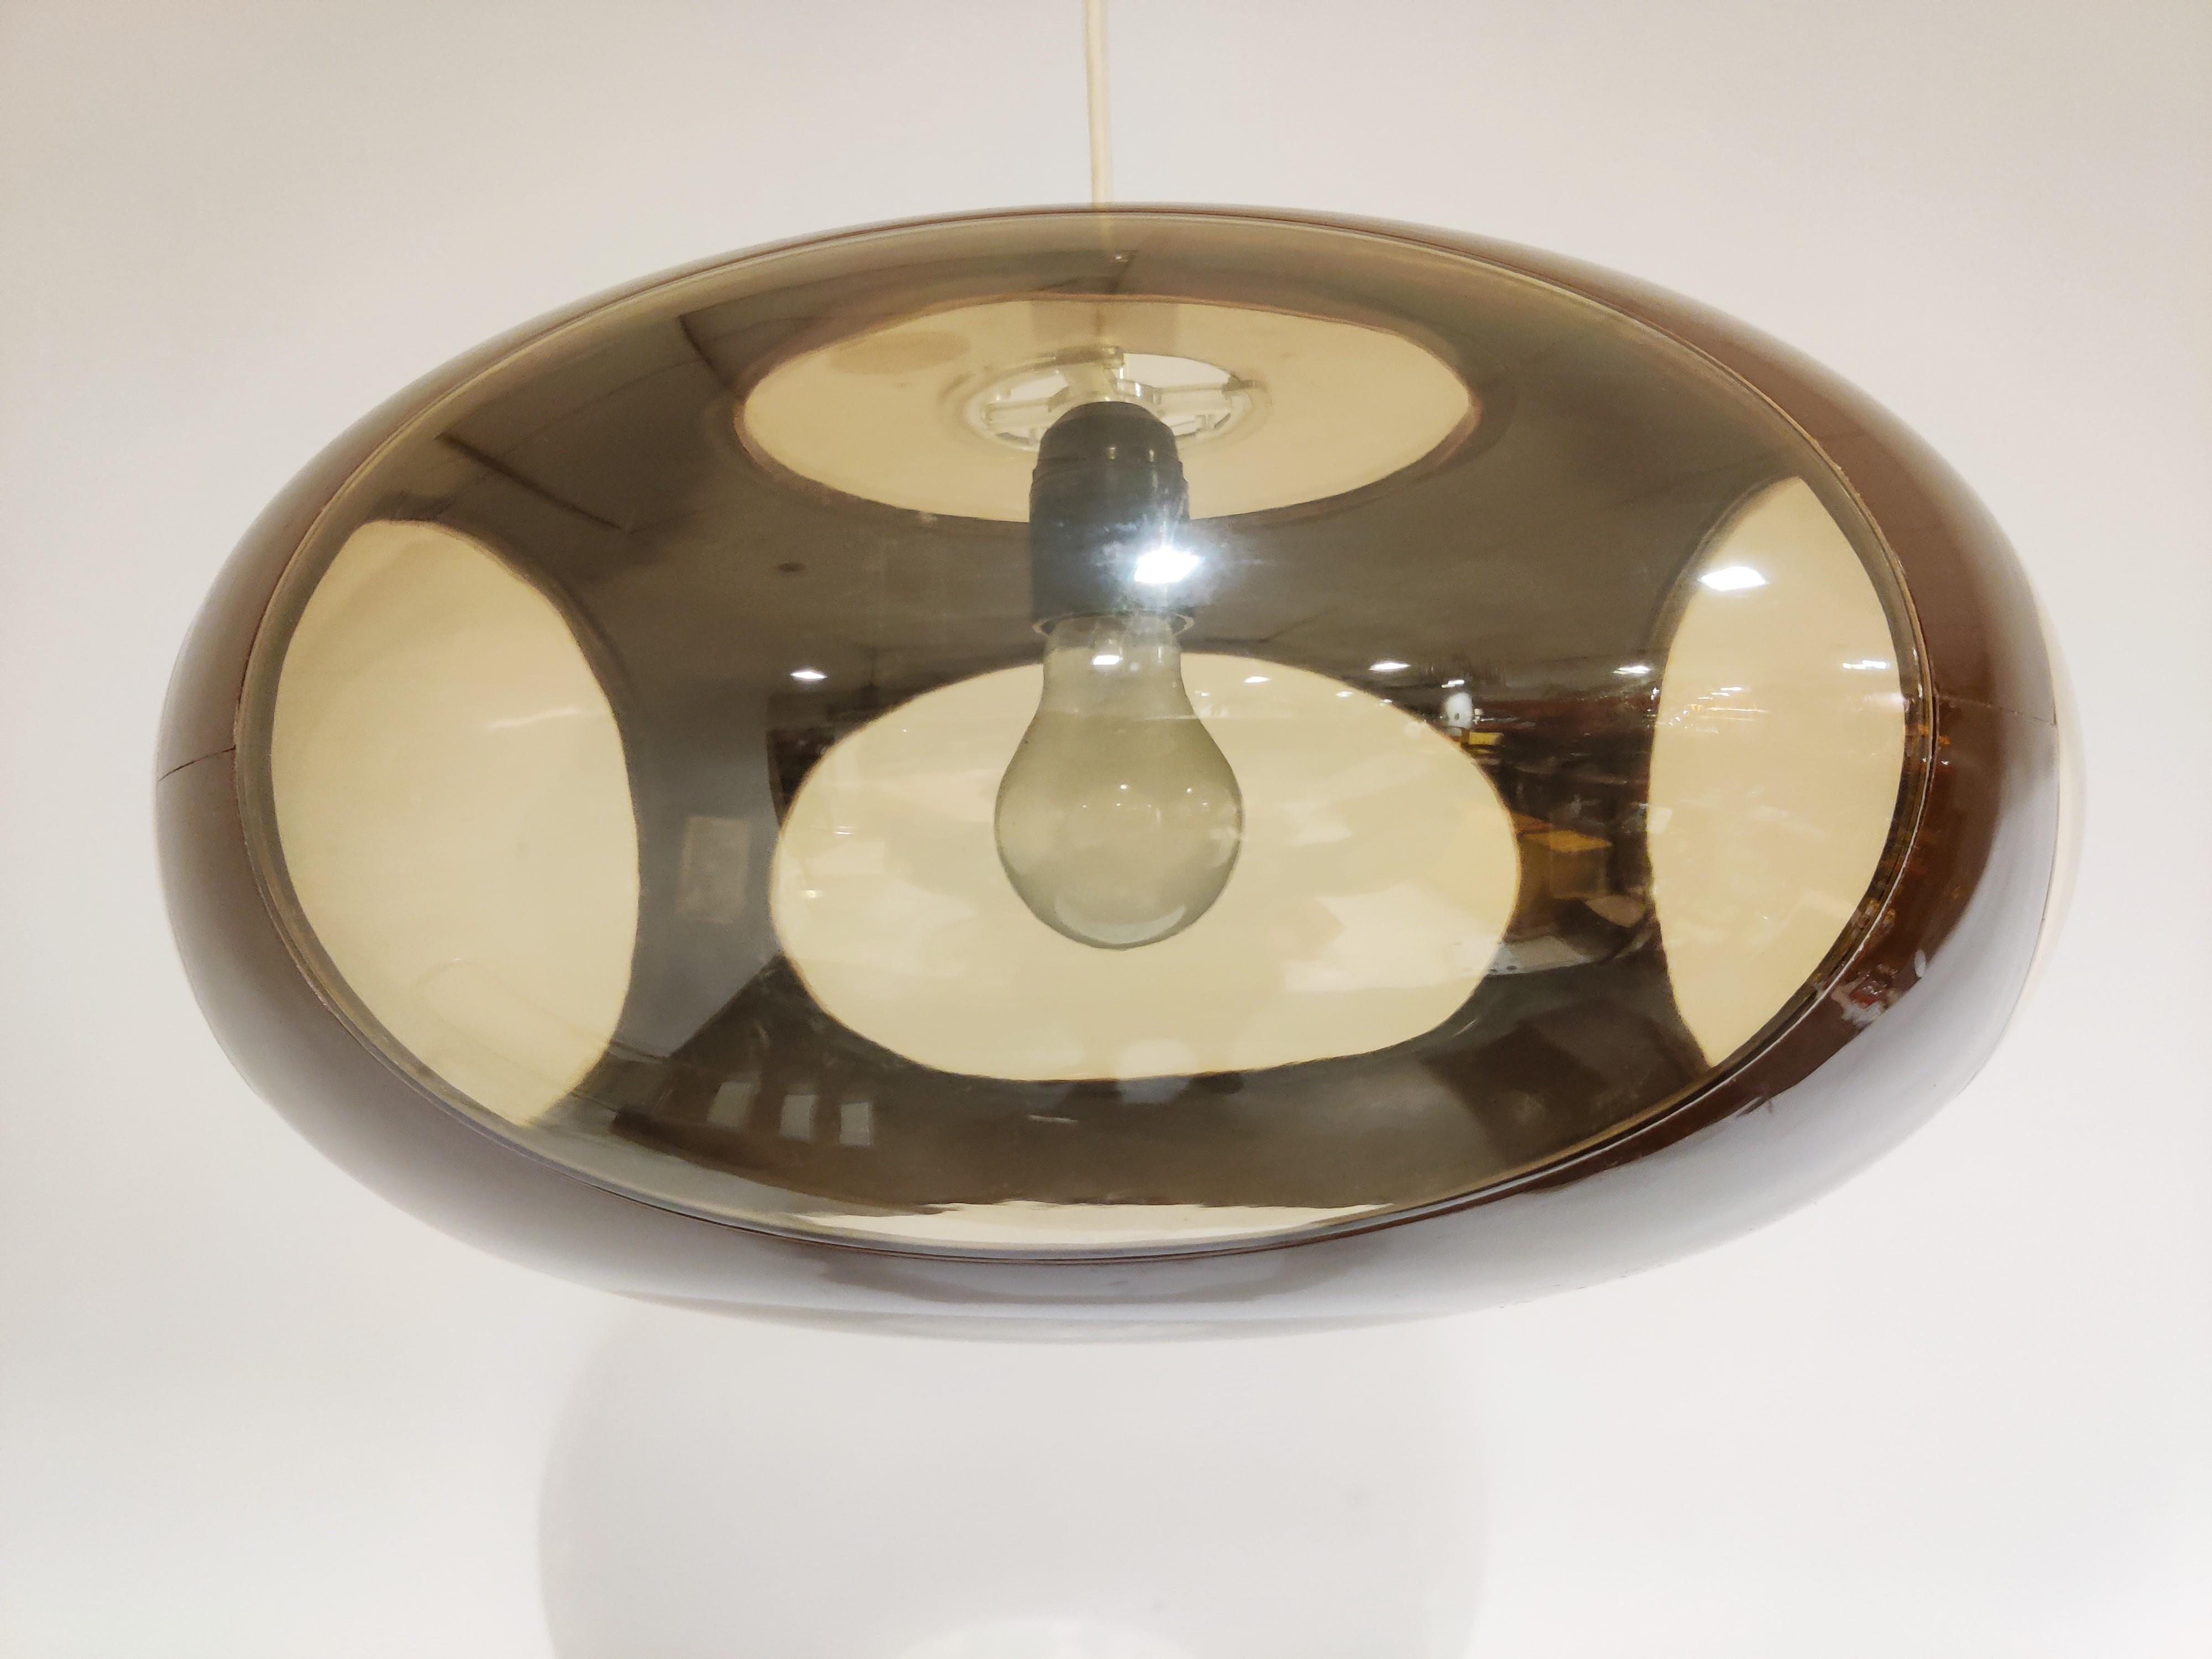 Midcentury Space Age 'bug eye' or UFO pendant light by Massive.

The lamp is mostly referred to as Luigi Colani design but is not correct. These where produced in Belgium by a lighting company called Massive.

Nevertheless it is a great original